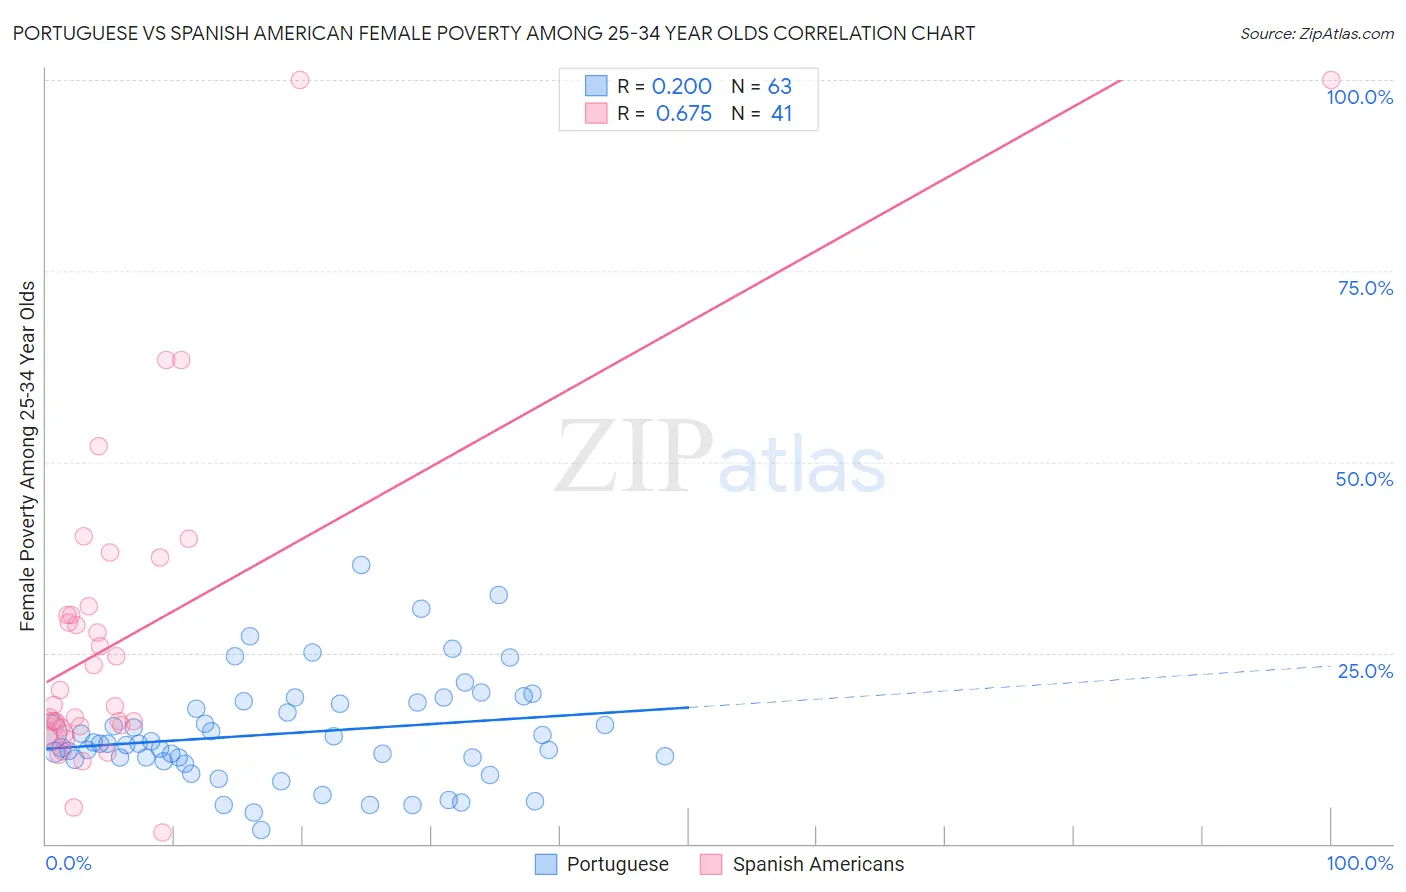 Portuguese vs Spanish American Female Poverty Among 25-34 Year Olds